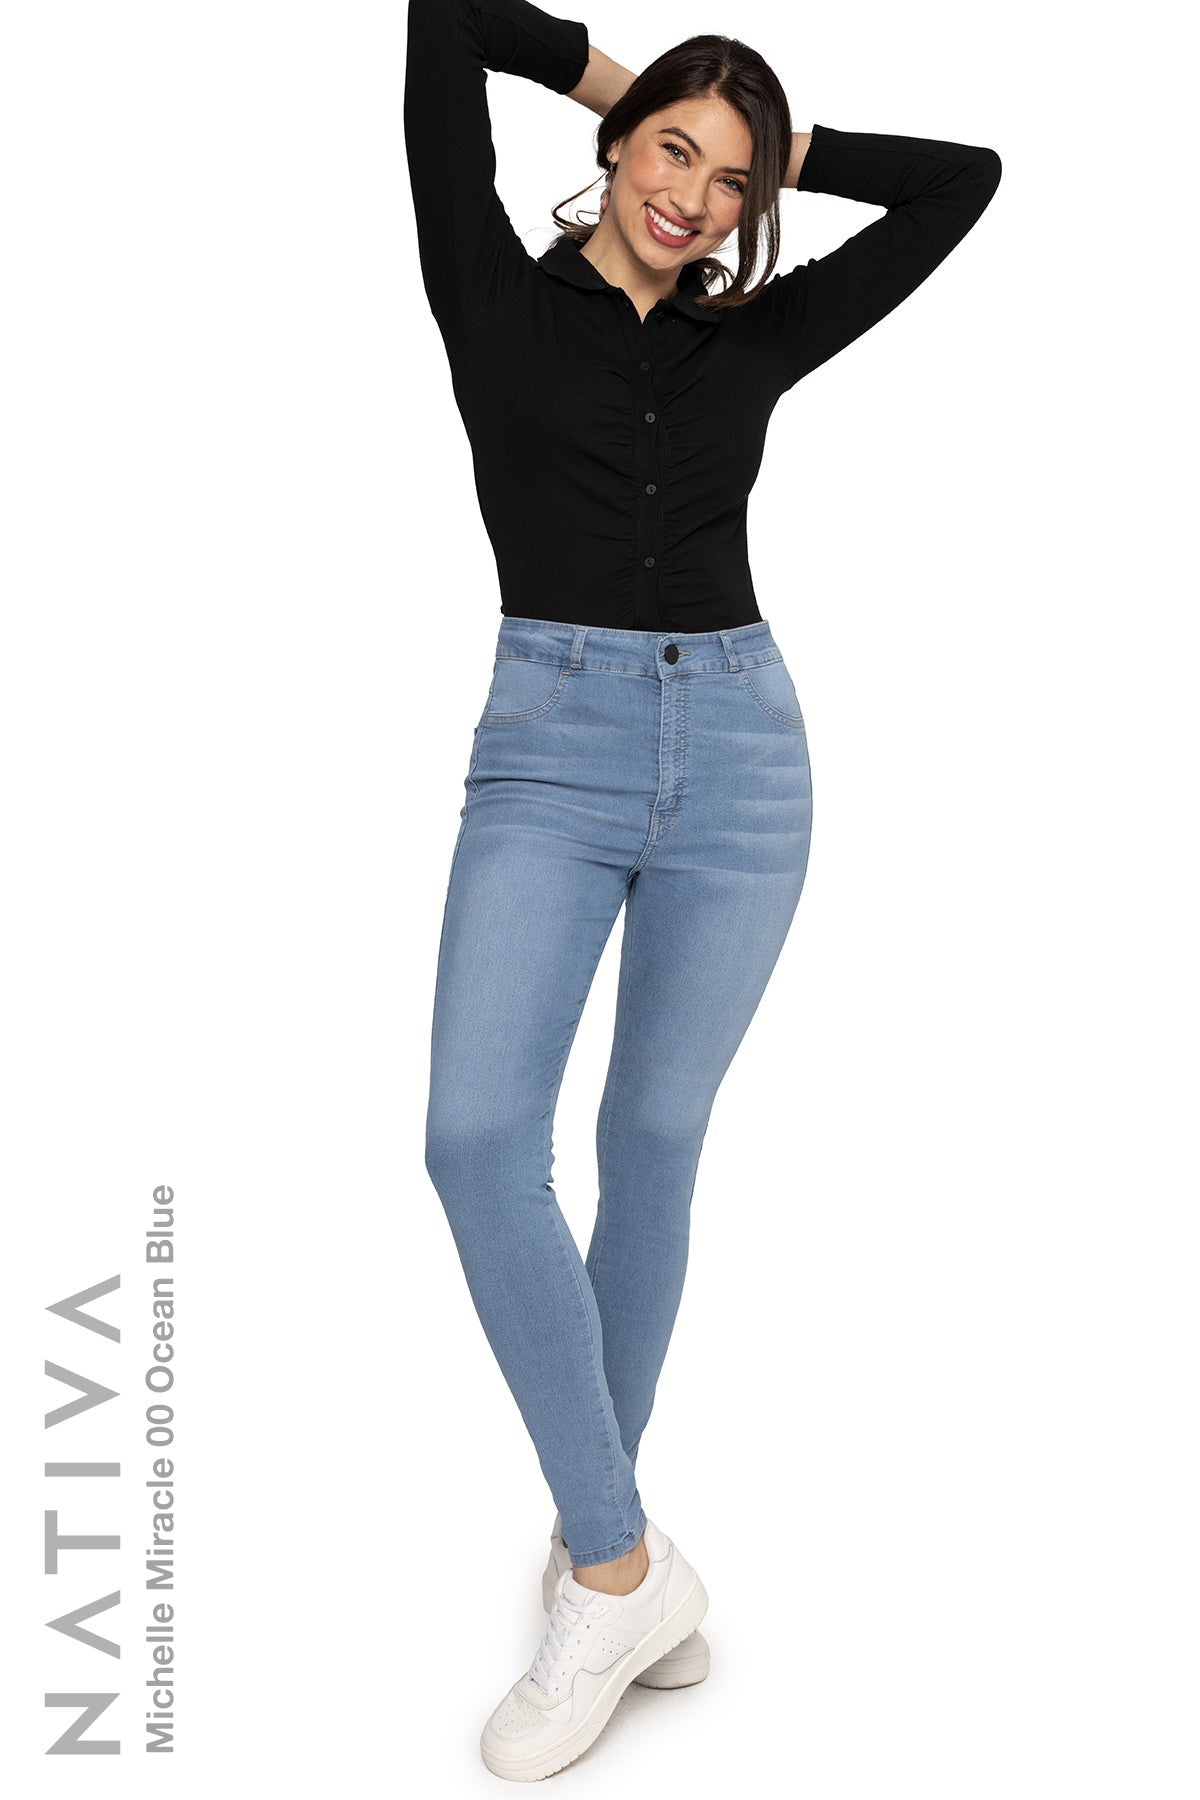 MIRACLE JEANS. NATIVA, MICHELLE 00 OCEAN Ca High Shaping STRETCH BLUE,